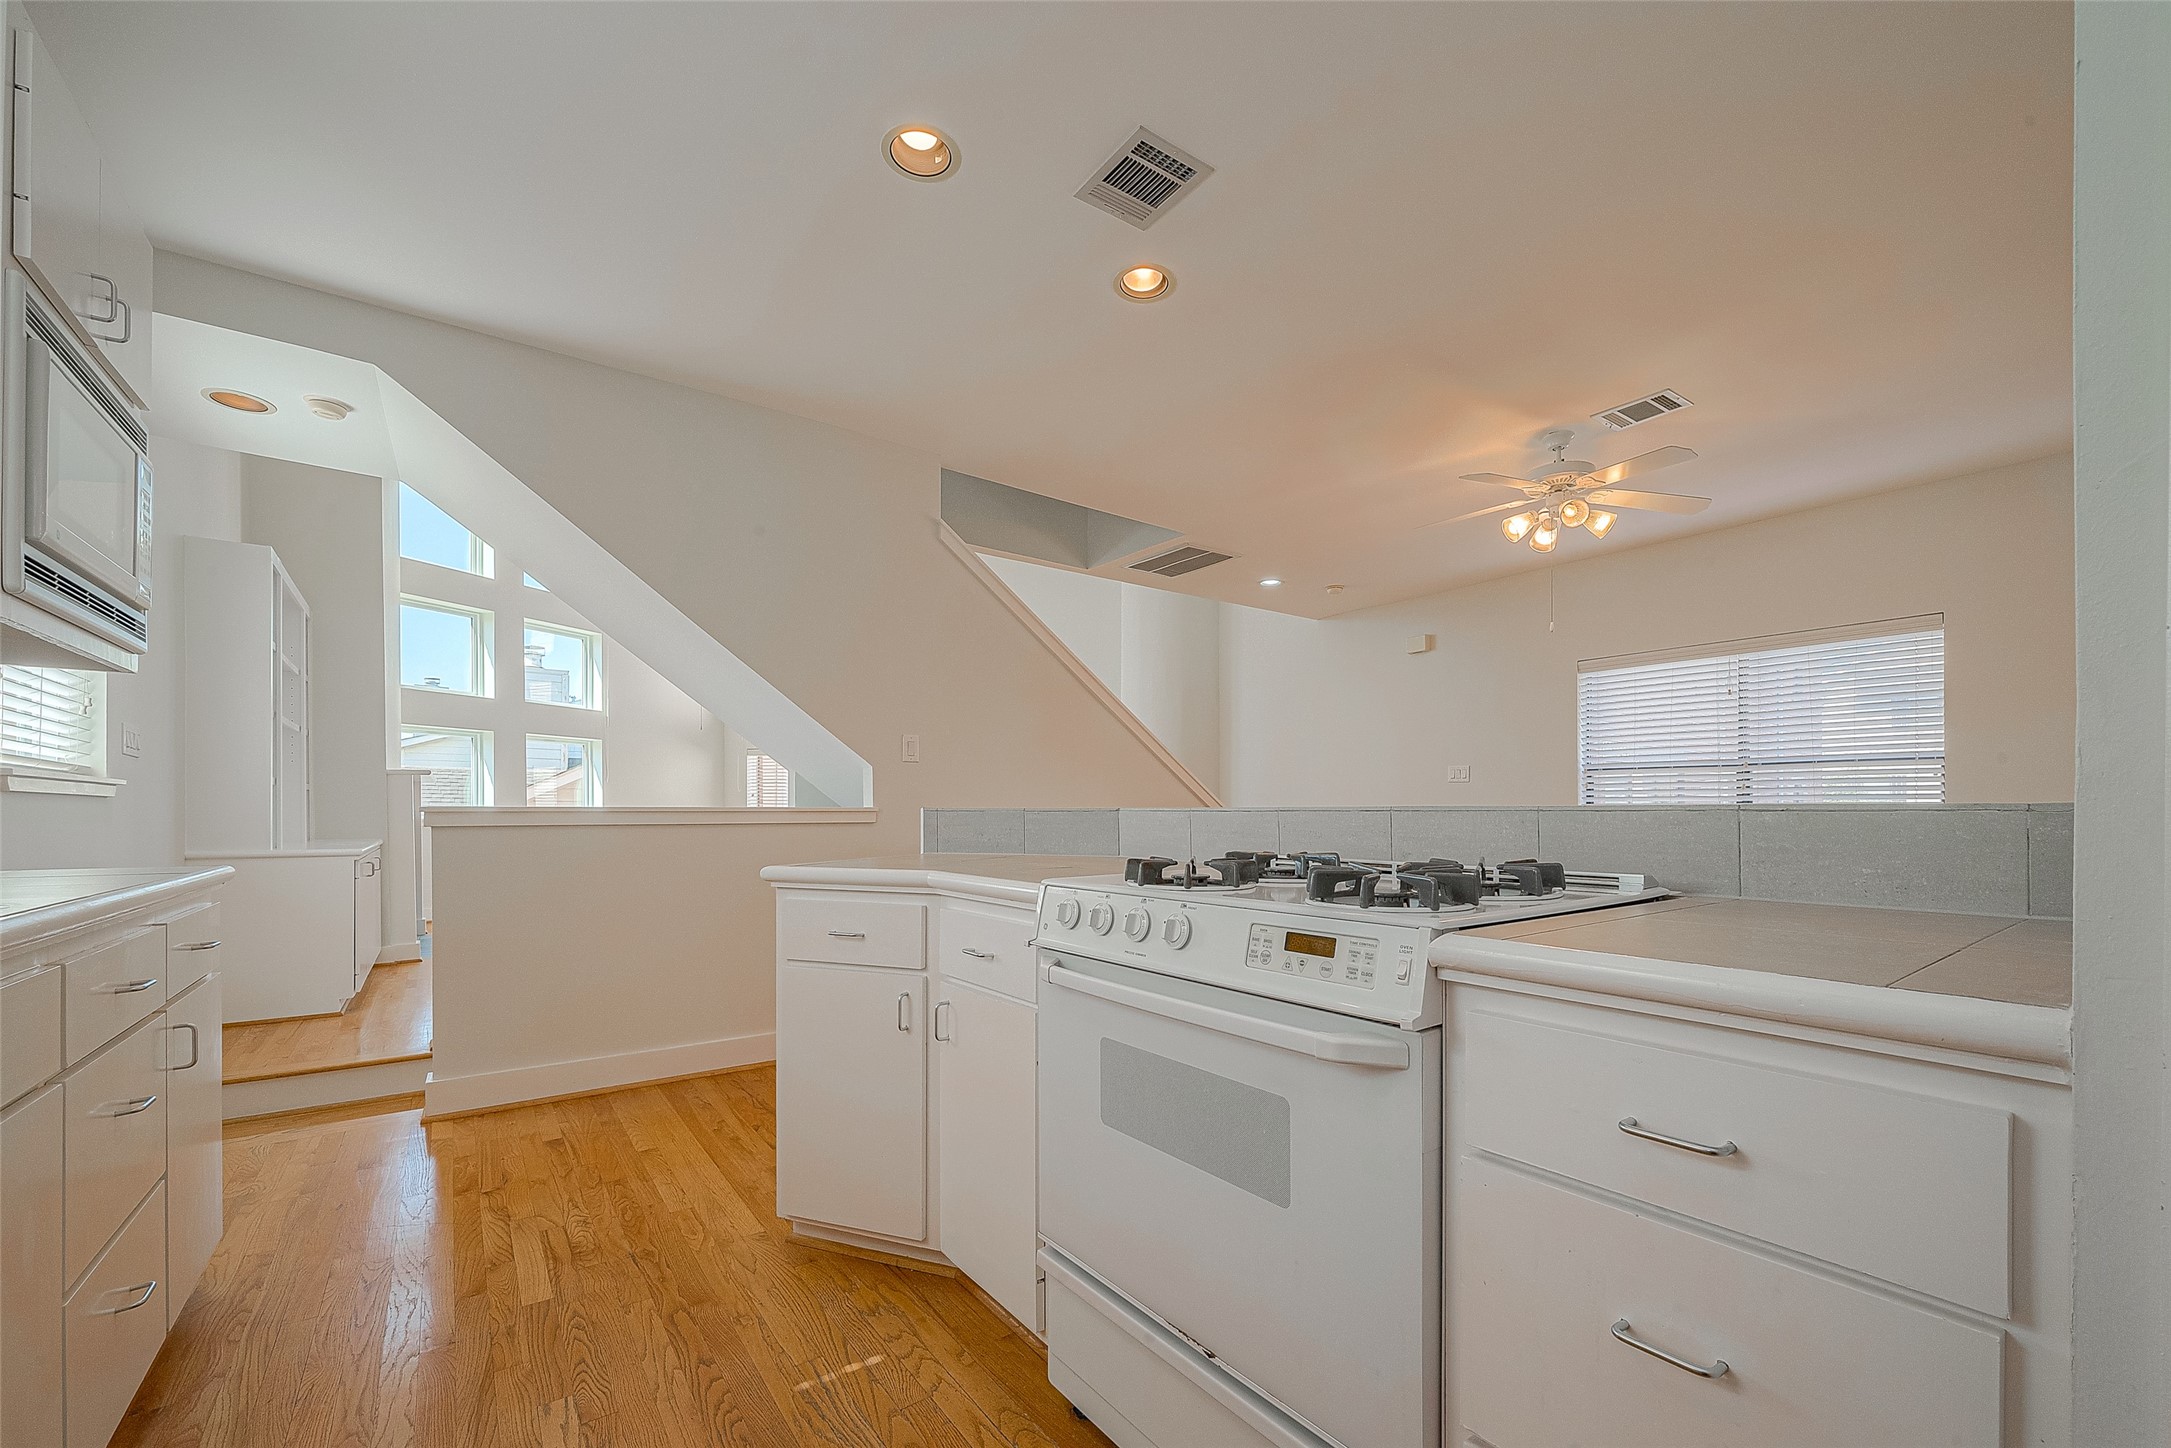 Walk in pantry and laundry facilities at far end.